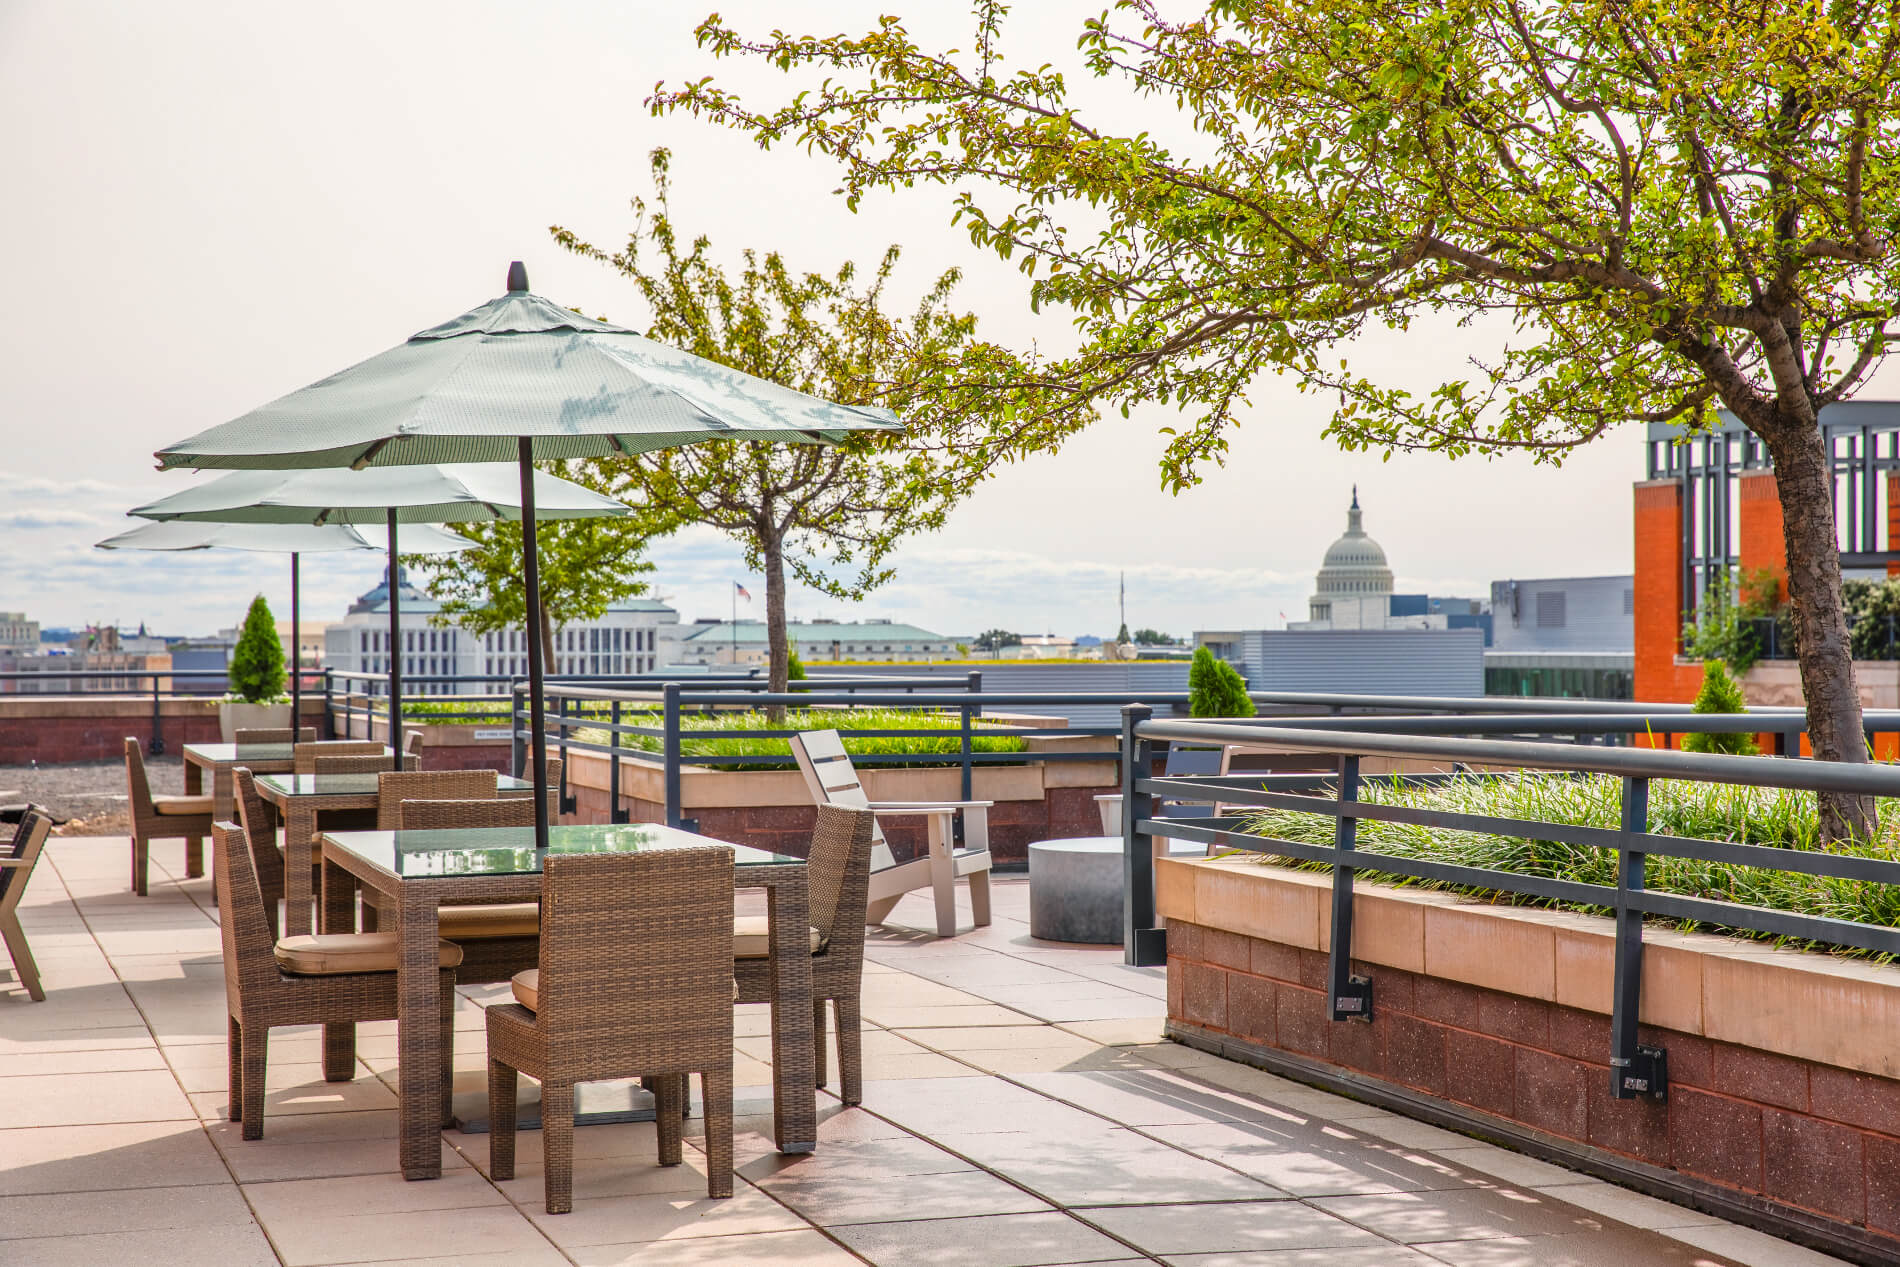 Rooftop tables and umbrellas with view of Capitol dome in background